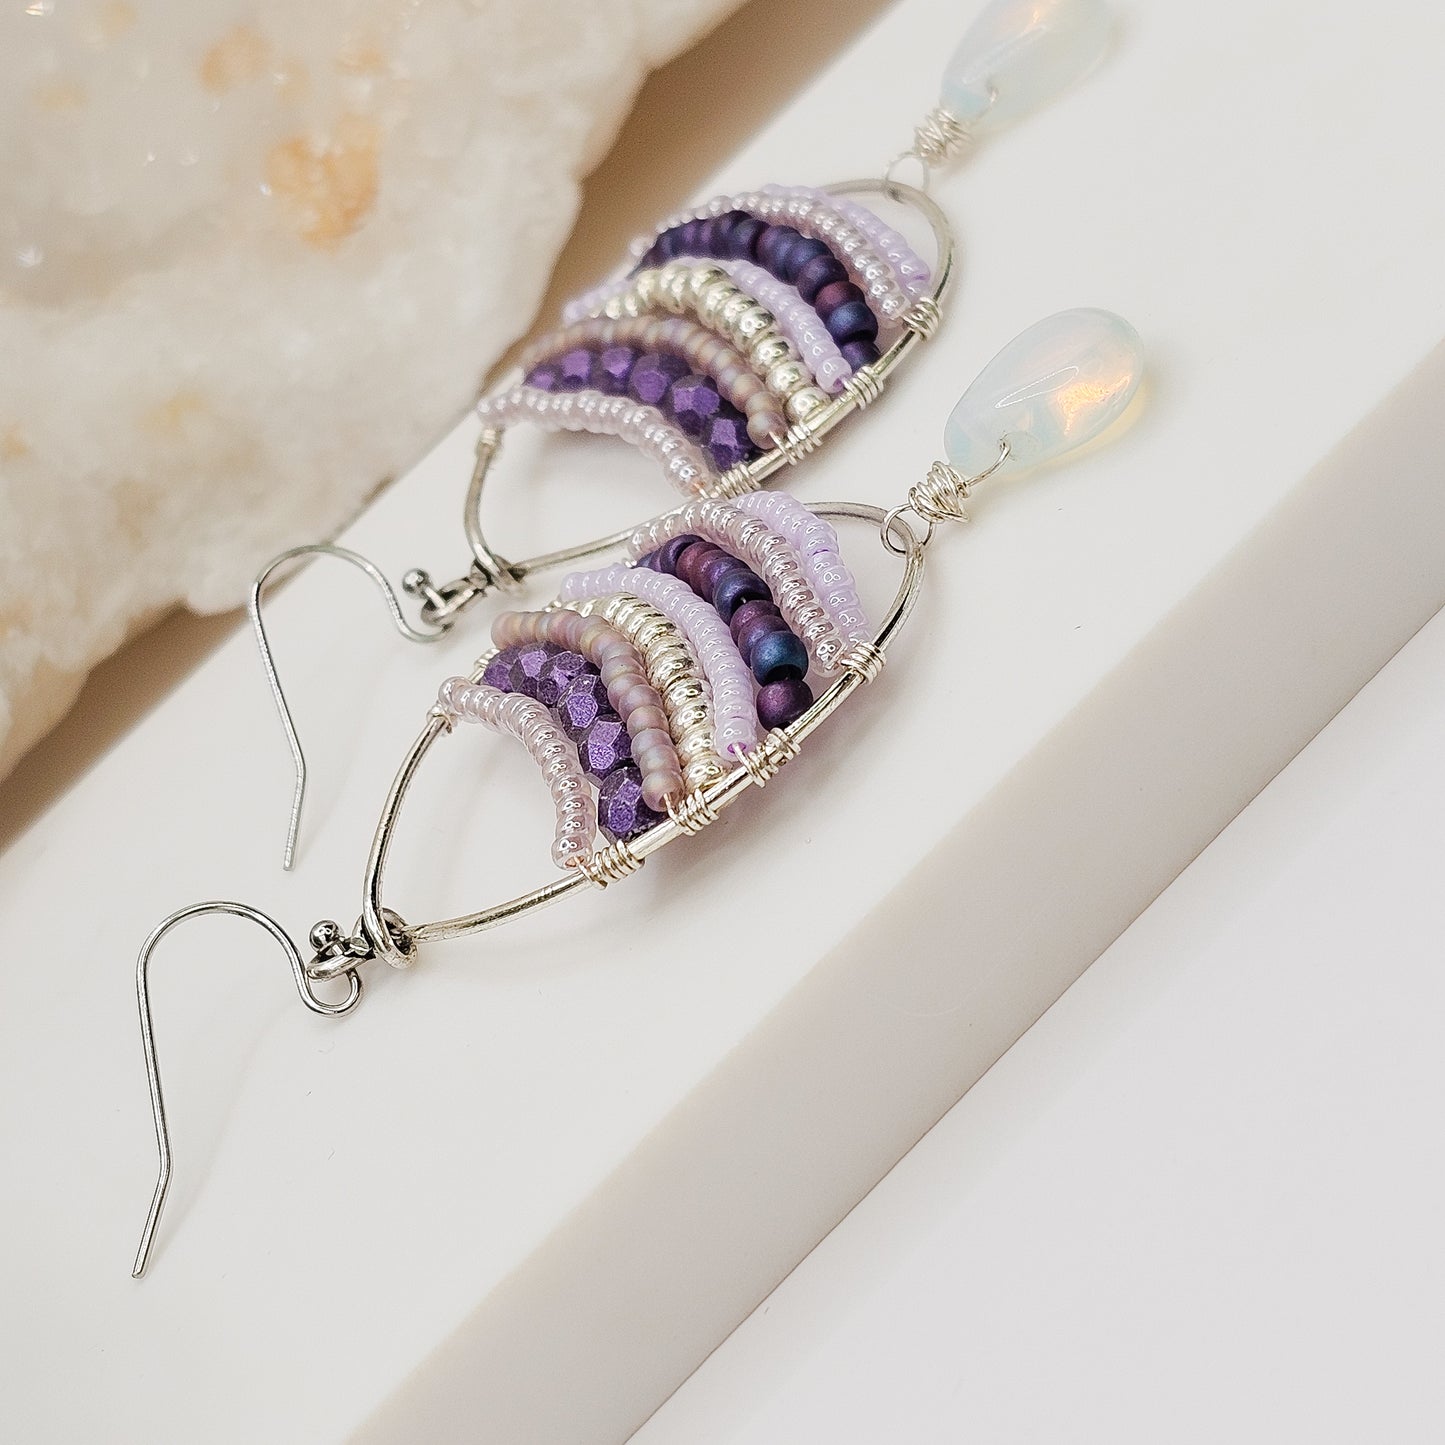 Lilla Earrings | sterling silver plated wire wrapped Opalite, Japanese seed bead and Czech fire polish bead earrings | handmade jewellery Australia | gift for woman